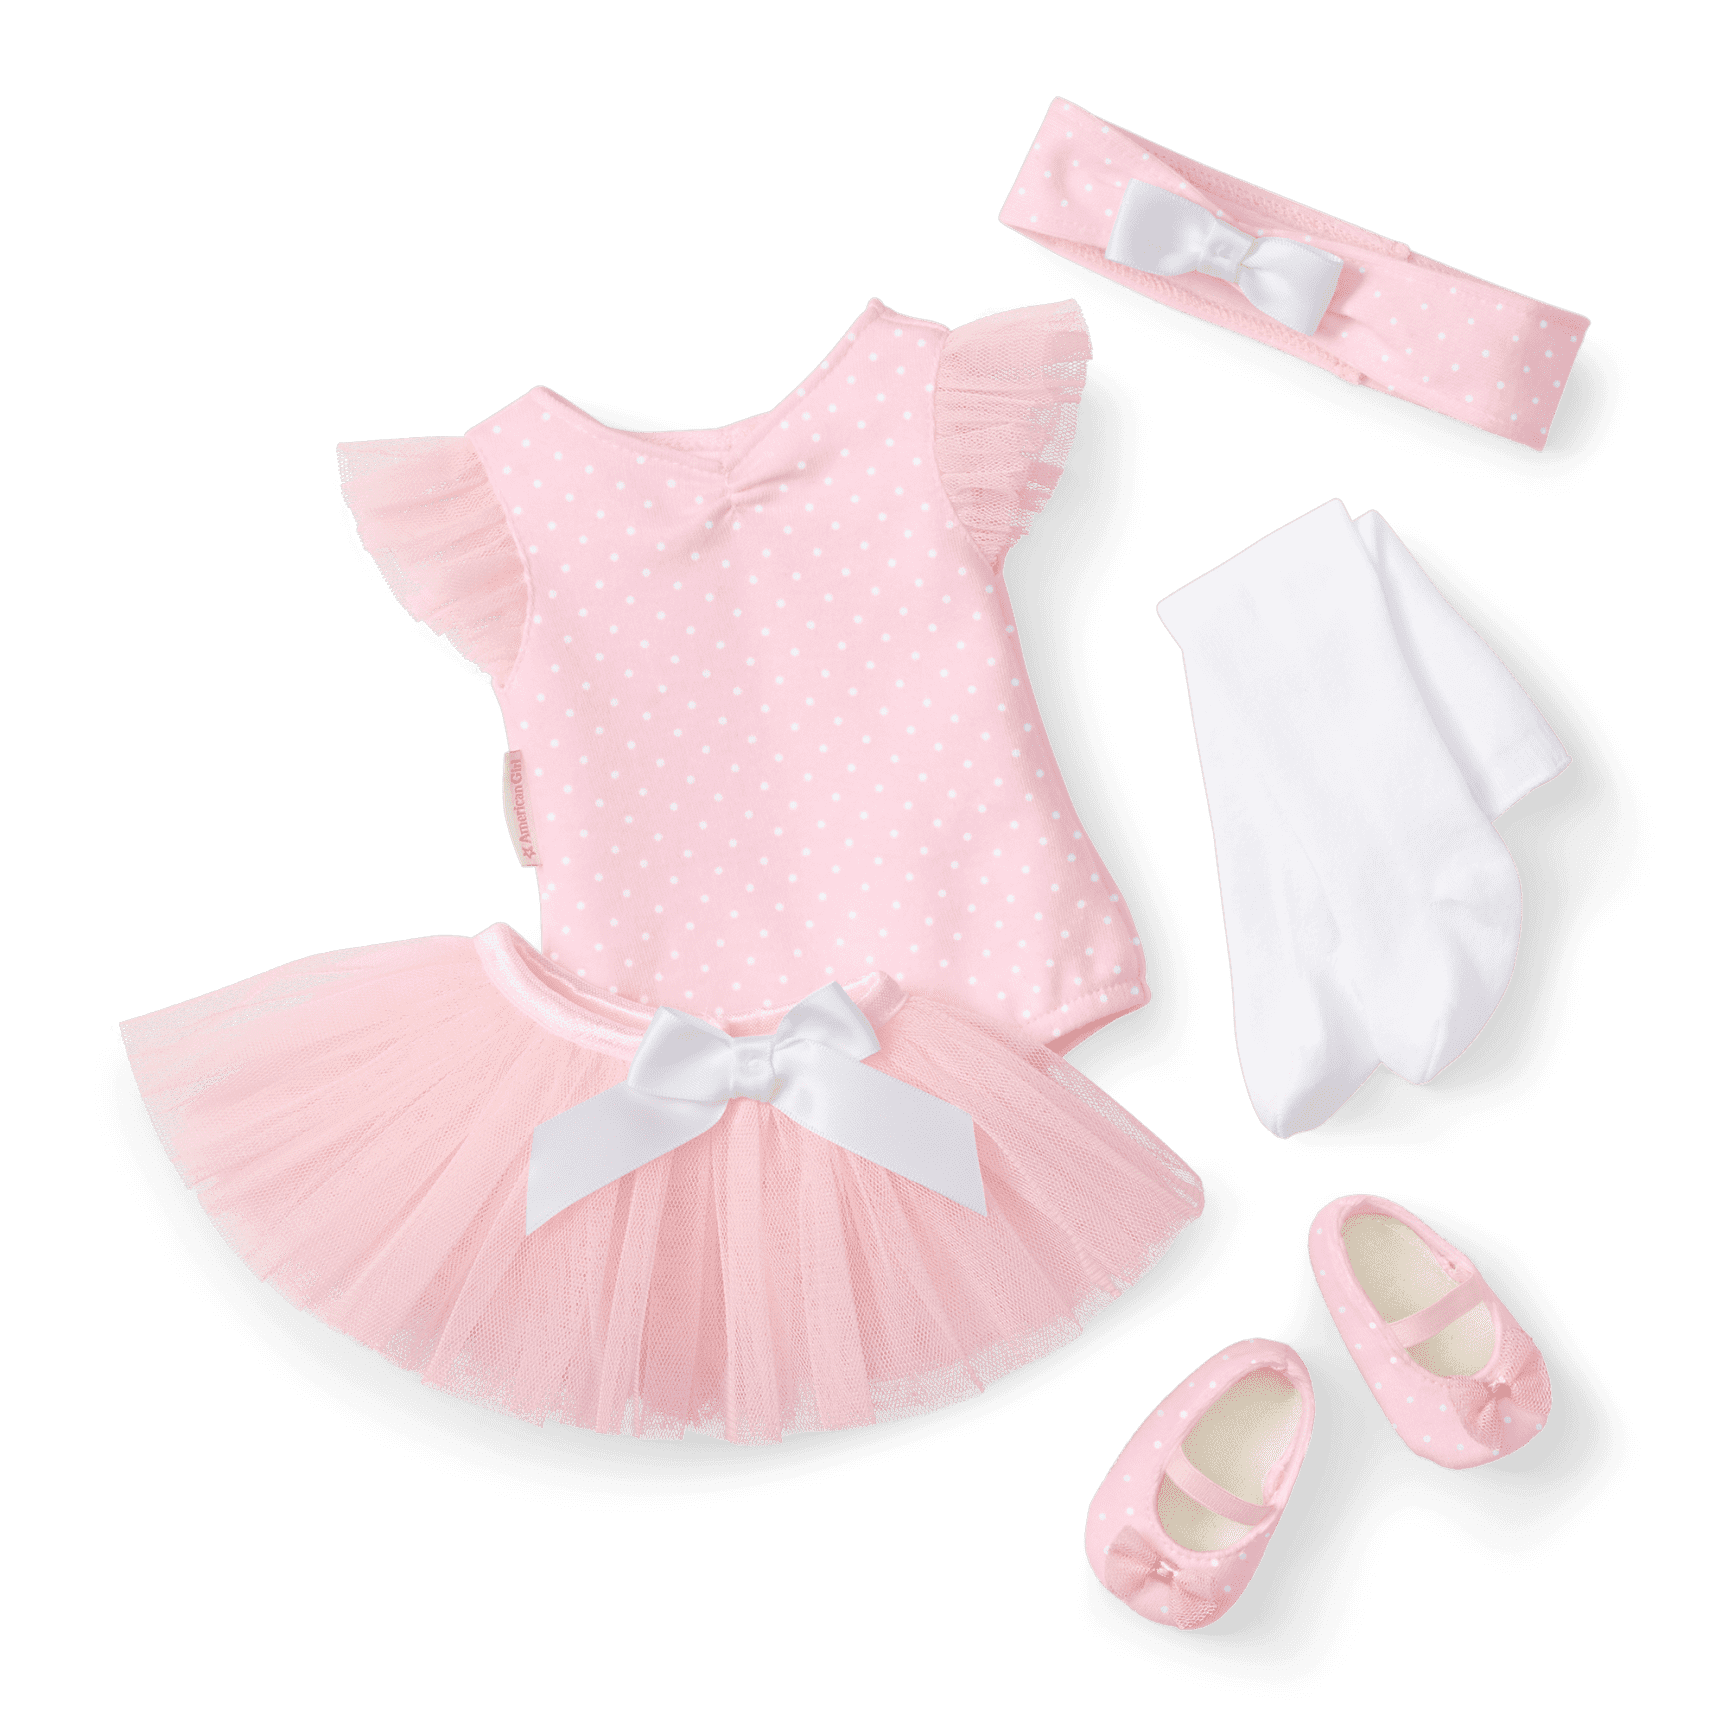 Bitty's™ Ballerina Outfit for Bitty Baby Dolls